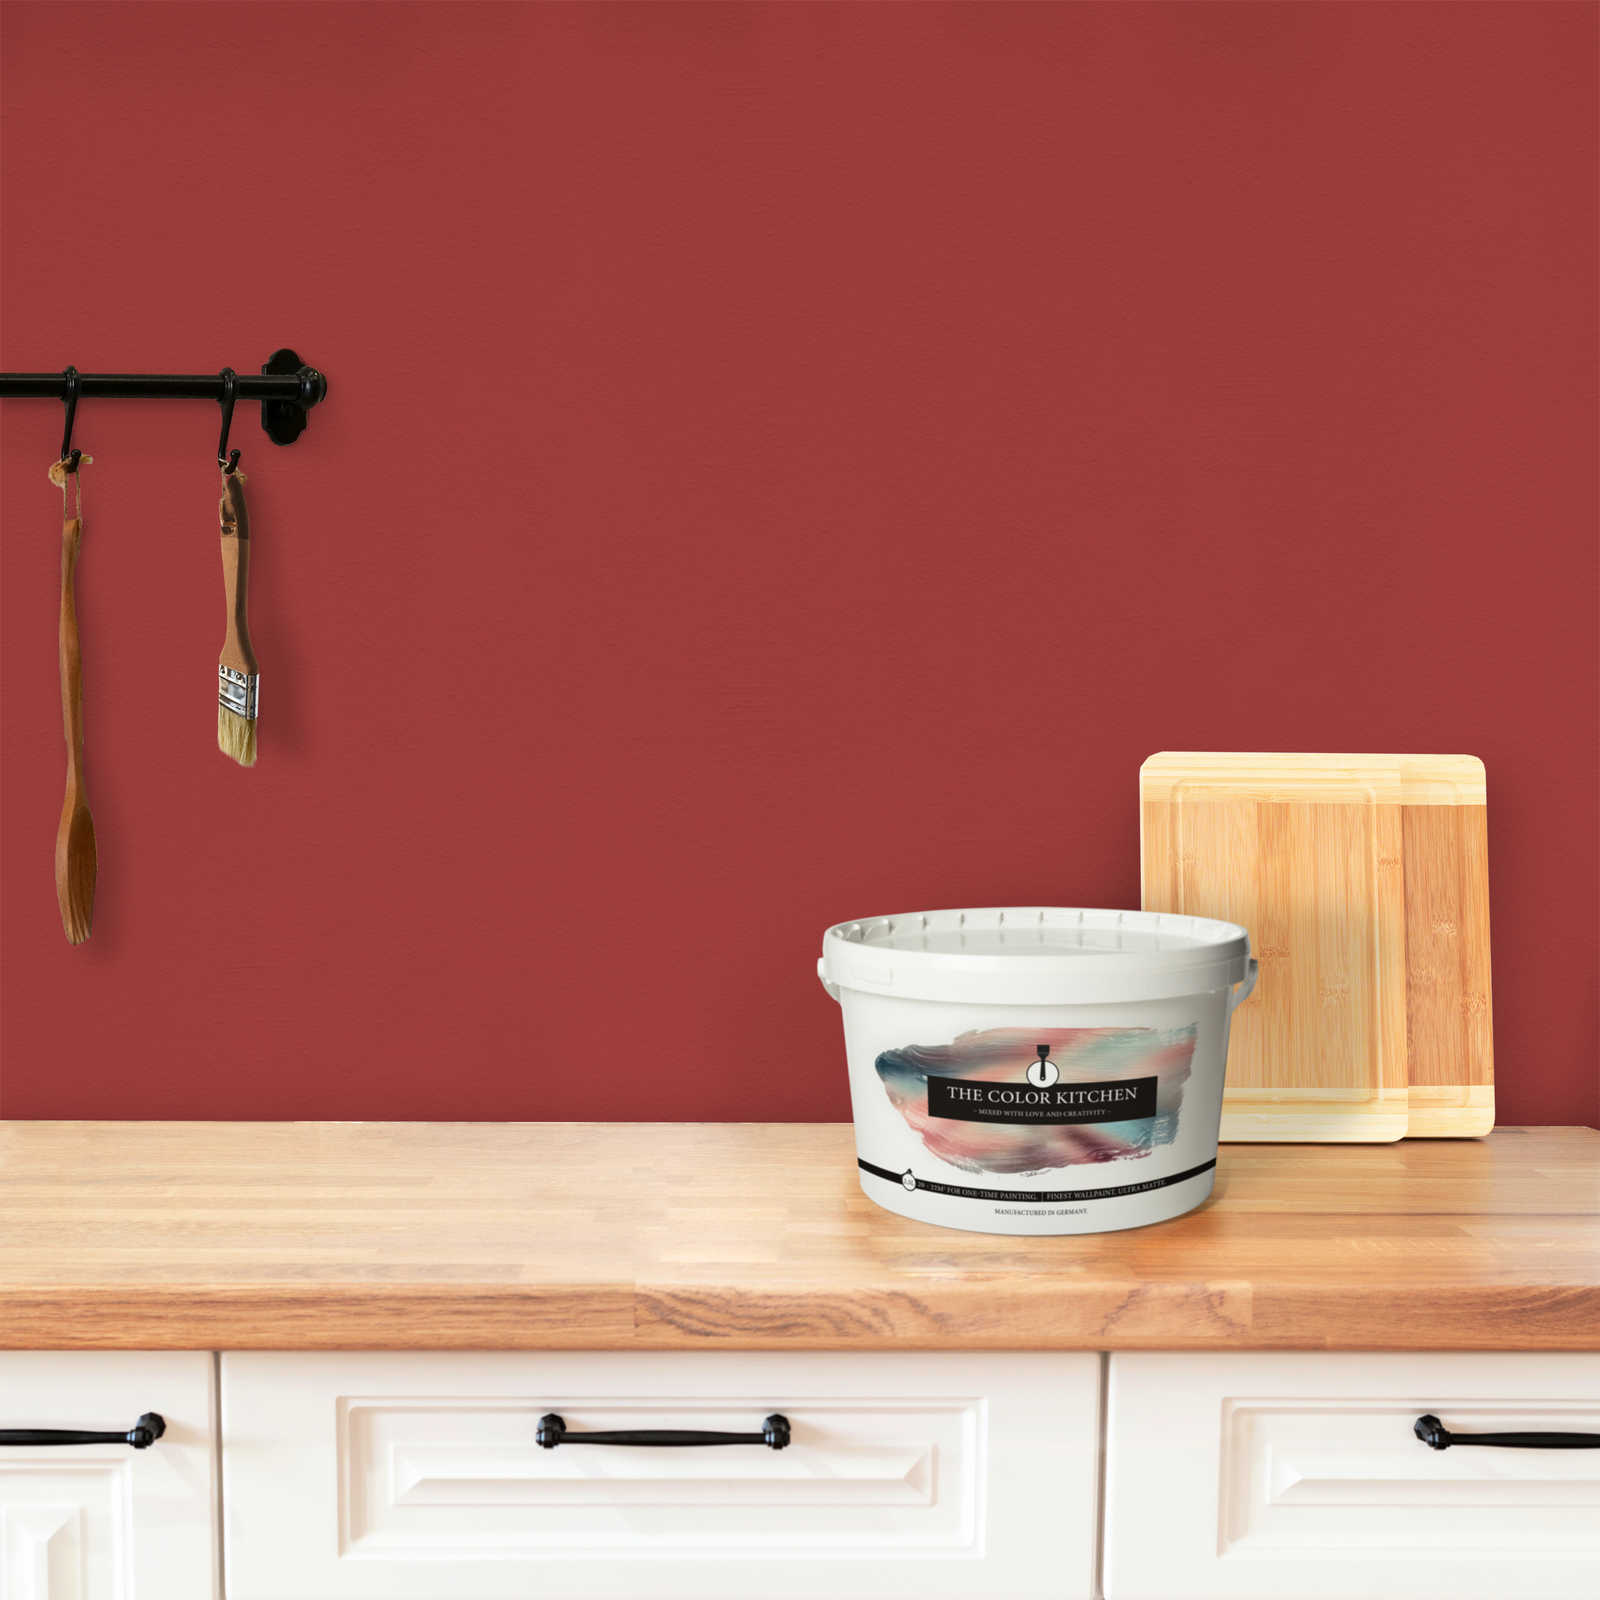             Wall Paint TCK7005 »Cheeky Chilli« in strong fire red – 2.5 litre
        